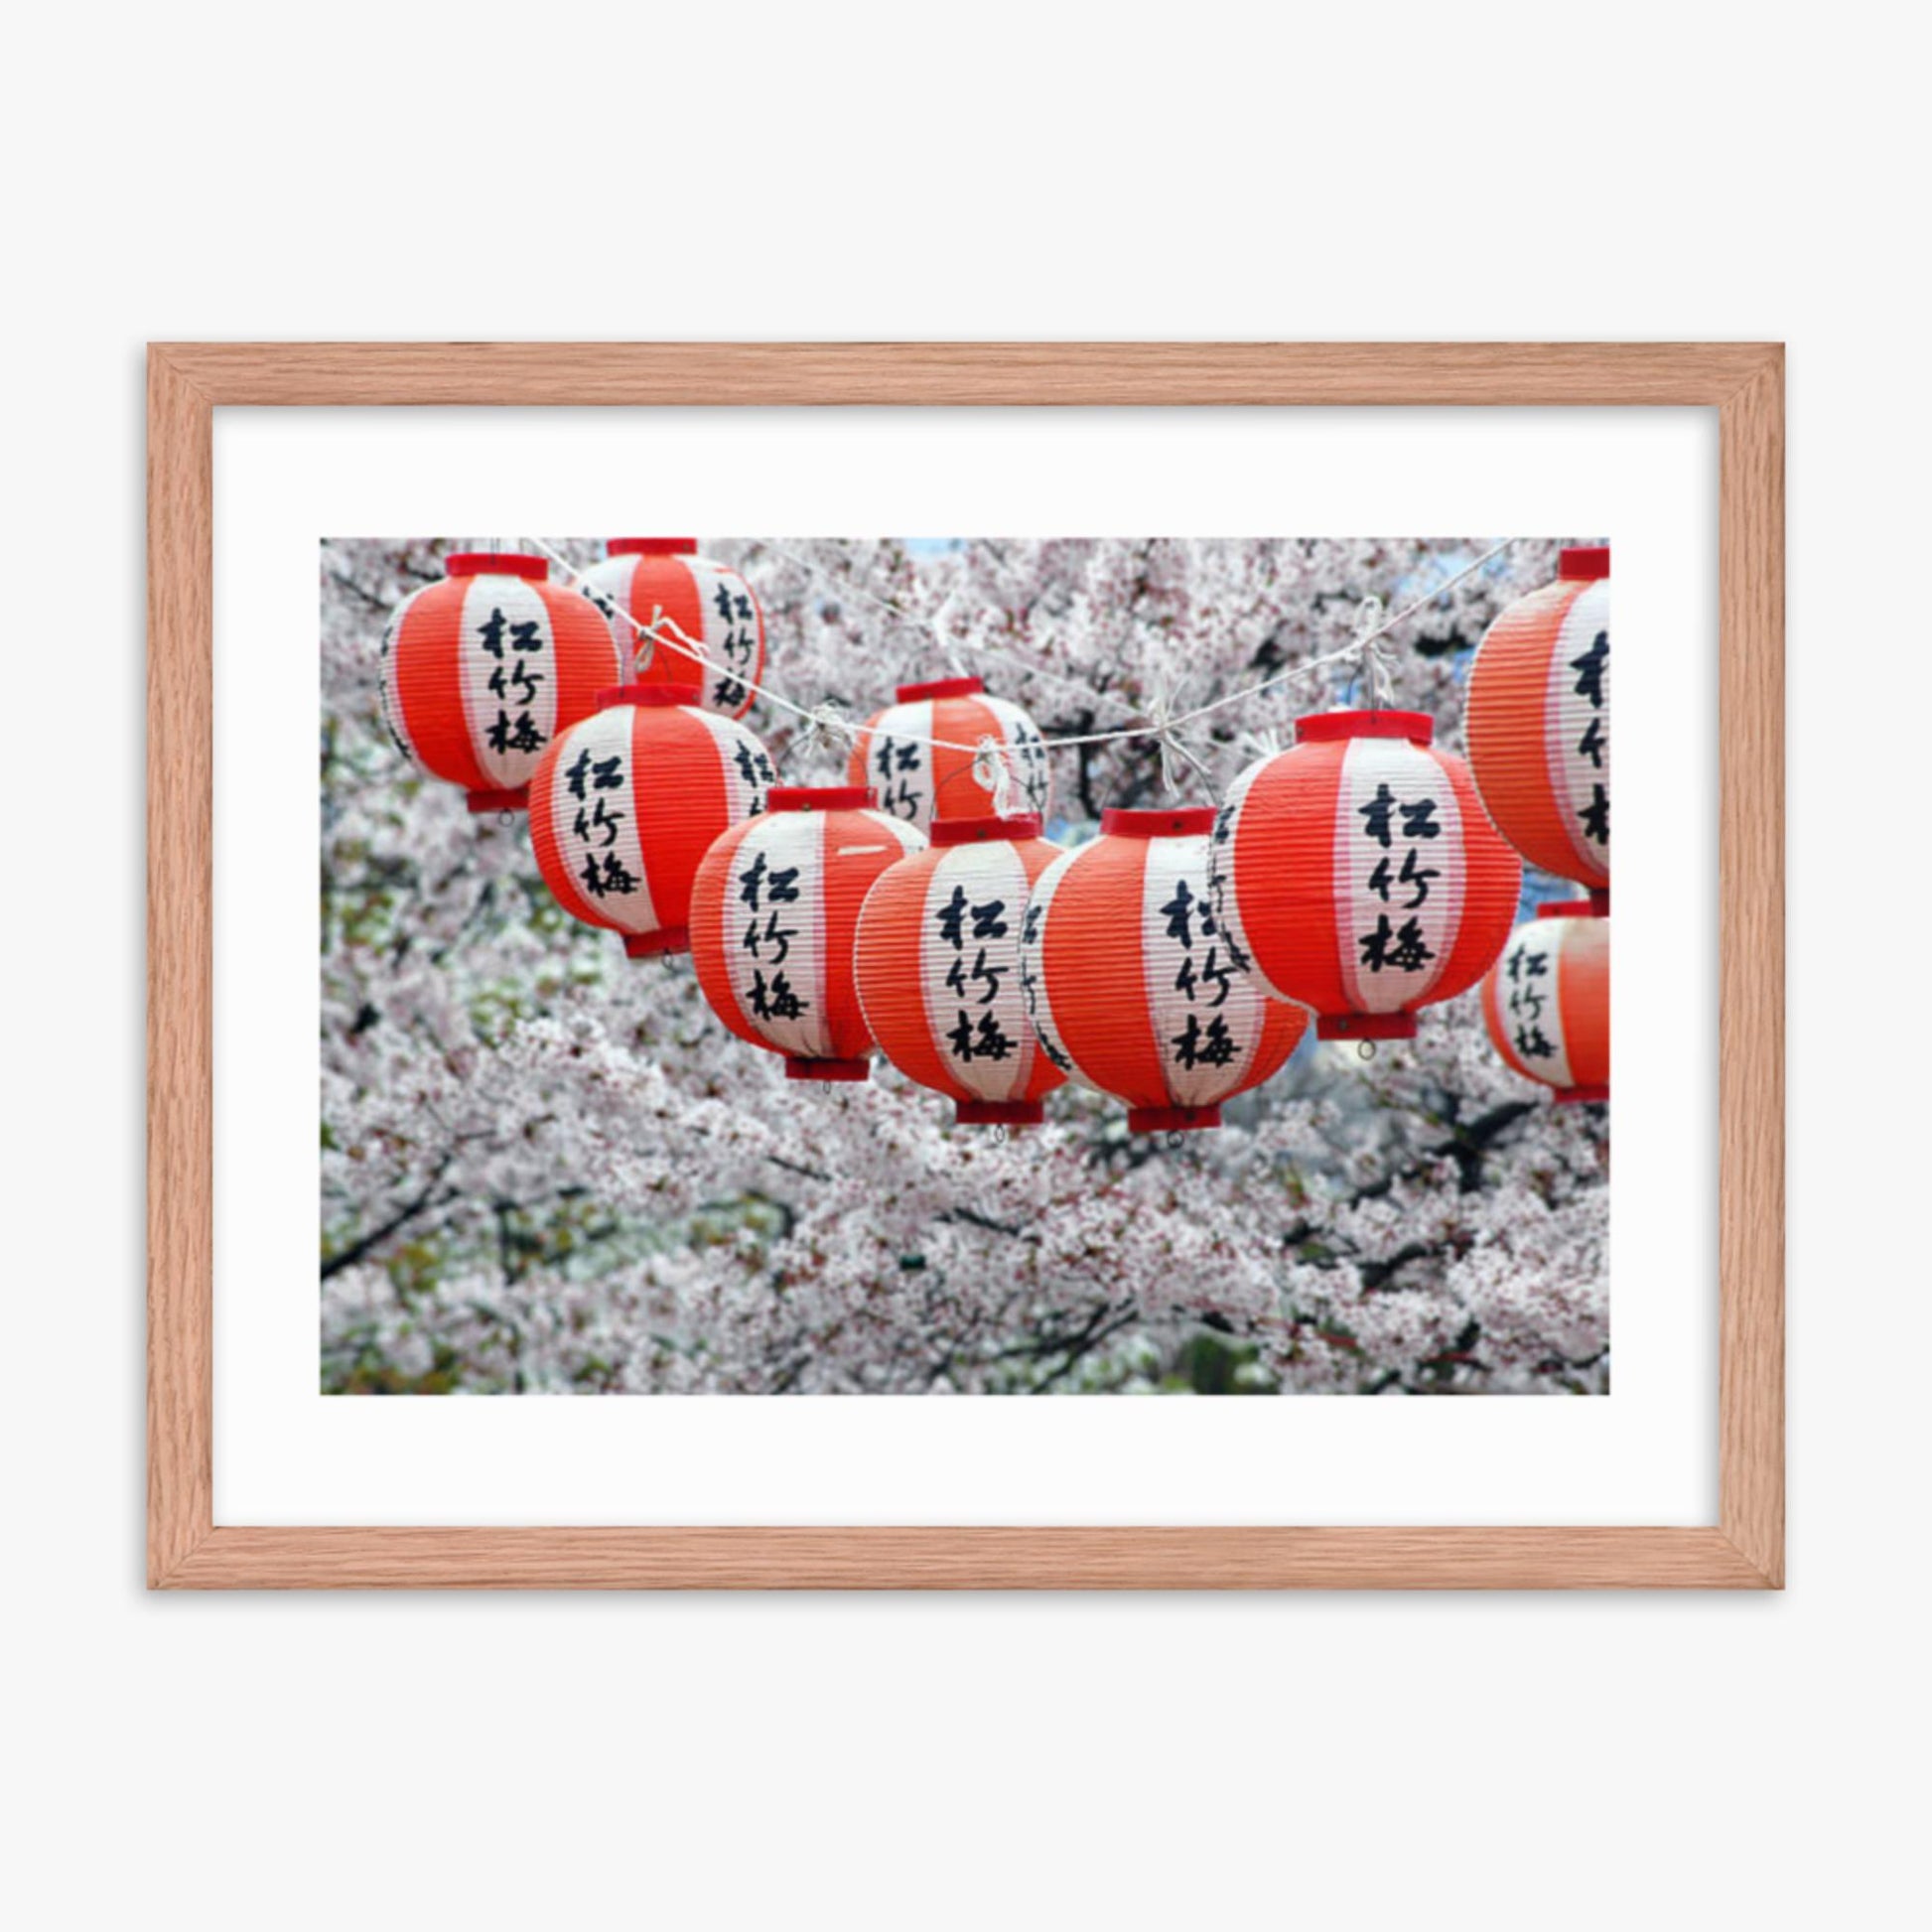 Japanese Lanterns and Cherry Blossom, Kyoto, Japan 18x24 in Poster With Oak Frame